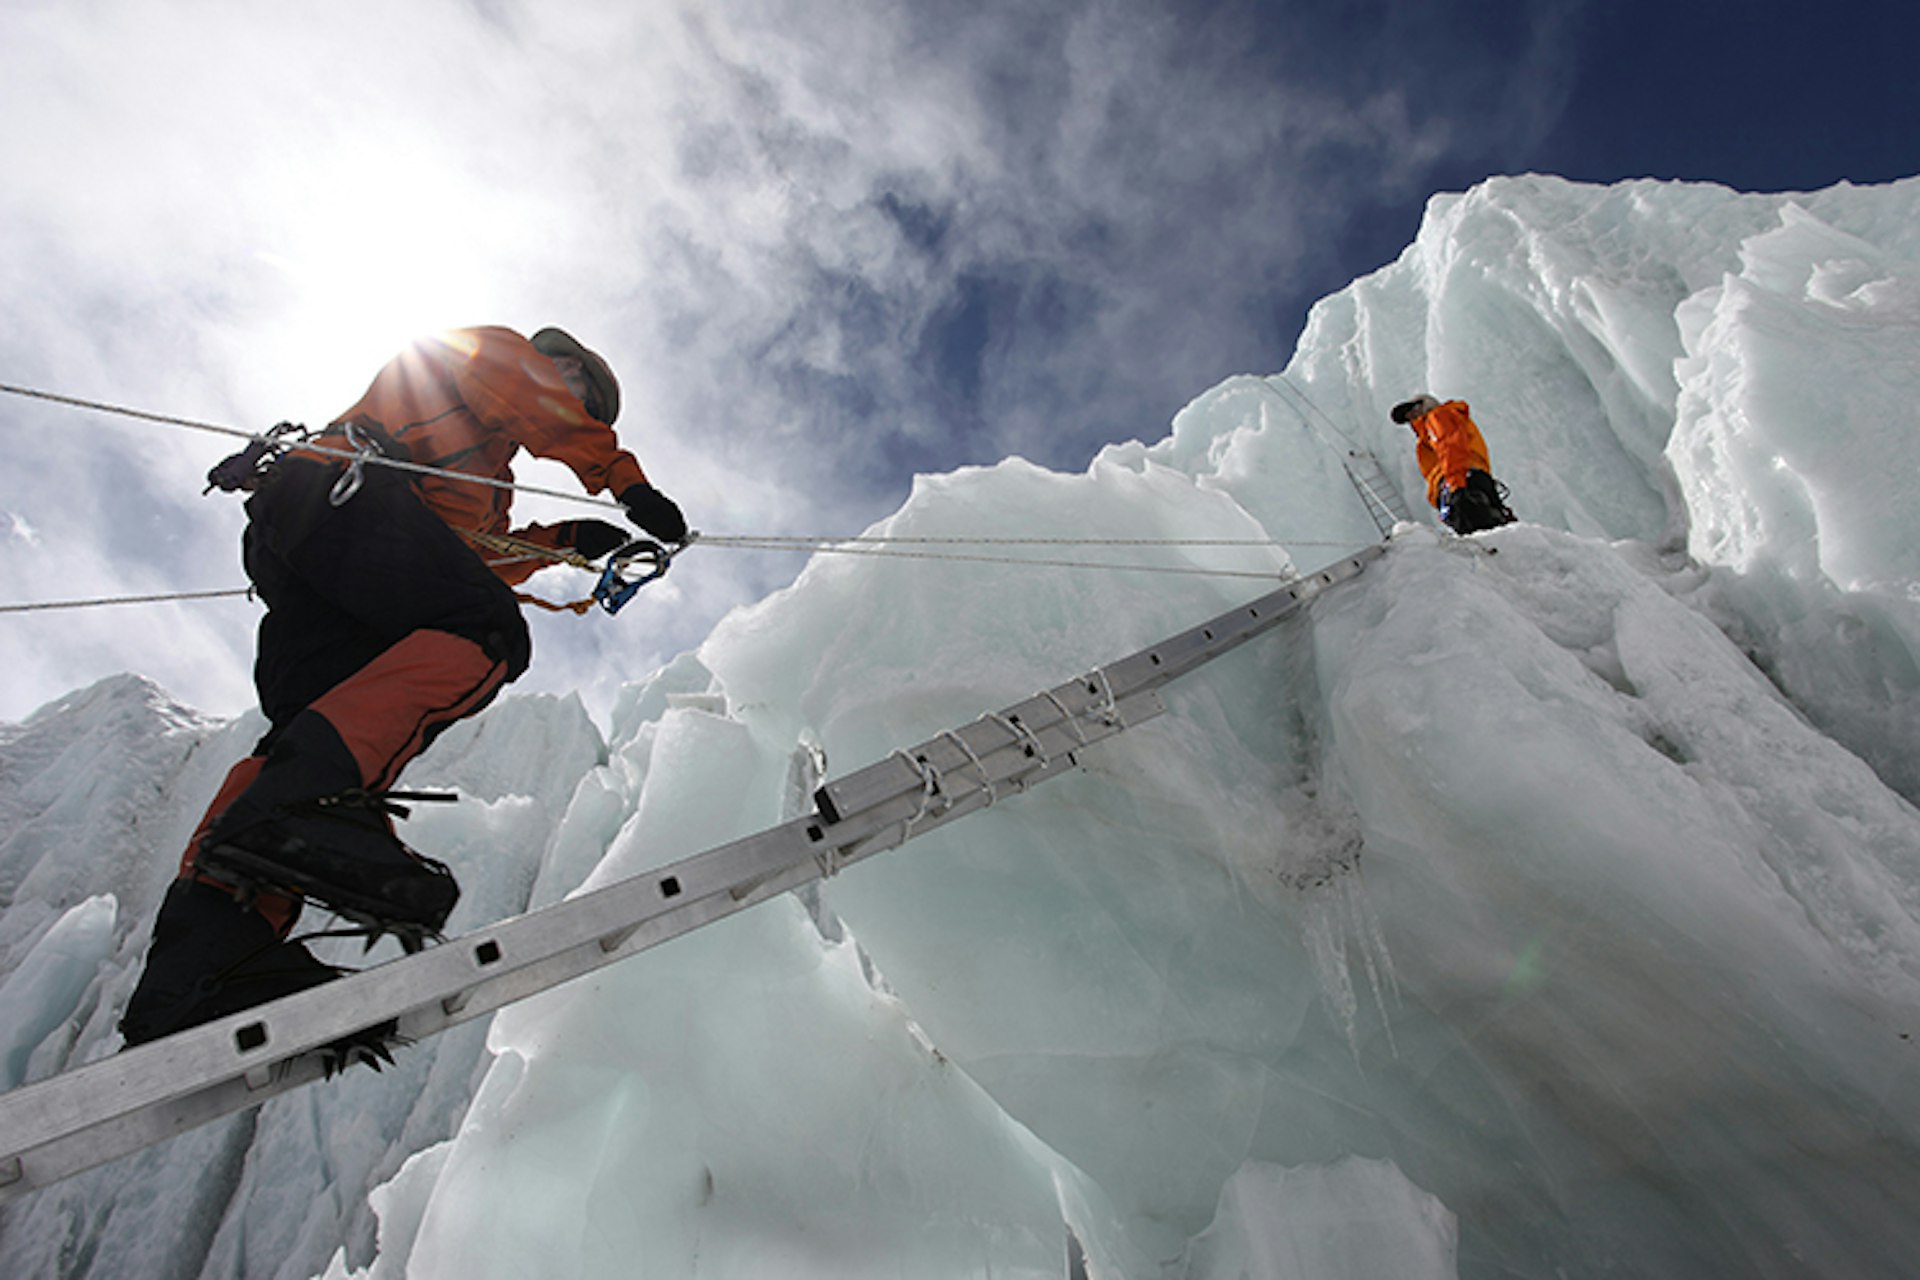 An ascent of Everest? Not for everyone, but it might prompt you to tackle a less formidable climb. Image by Jason Maehl / Moment Select / Getty Images